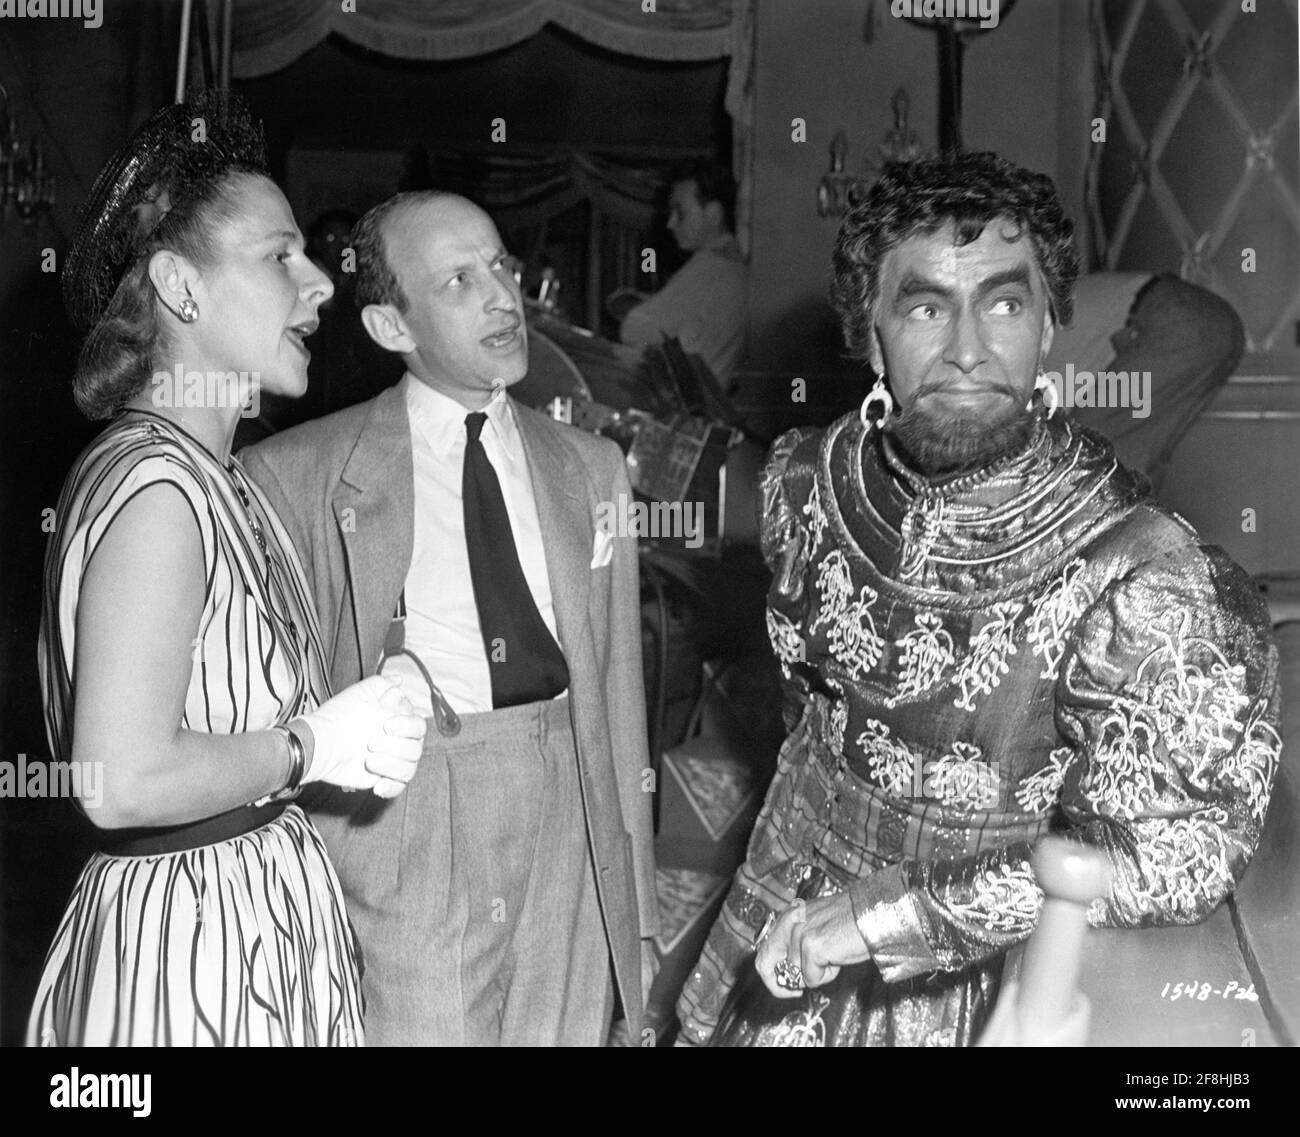 Writers RUTH GORDON and GARSON KANIN on set candid with RONALD COLMAN in costume as Othello during filming of A DOUBLE LIFE 1947 director GEORGE CUKOR writers Ruth Gordon and Garson Kanin  music Miklos Rozsa producer Michael Kanin  Kanin Productions / Universal Pictures Stock Photo